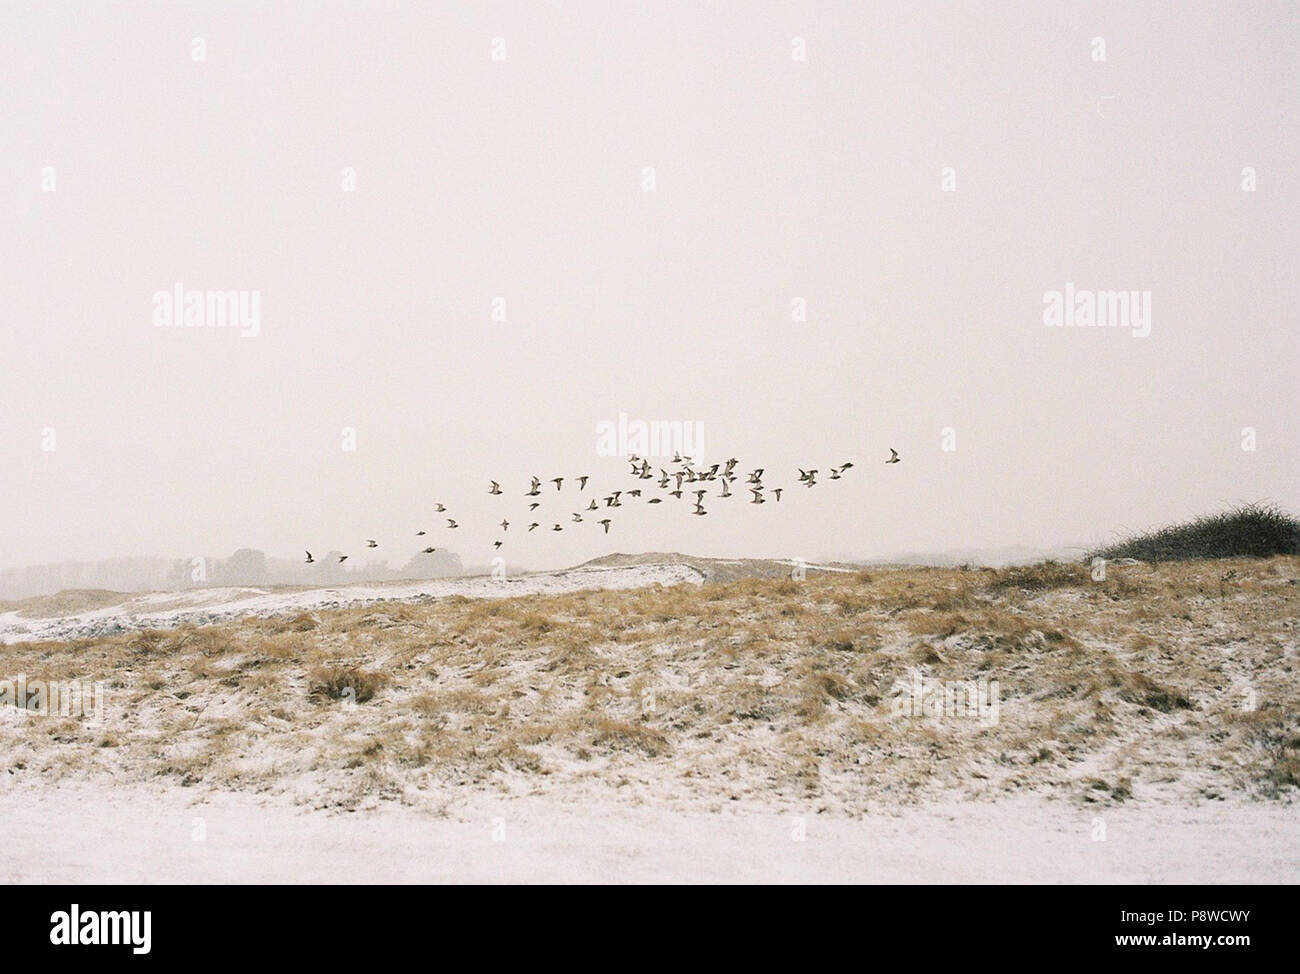 geese flying over snowy beach Pembrokeshire, Wales. Travel, landscape. Stock Photo